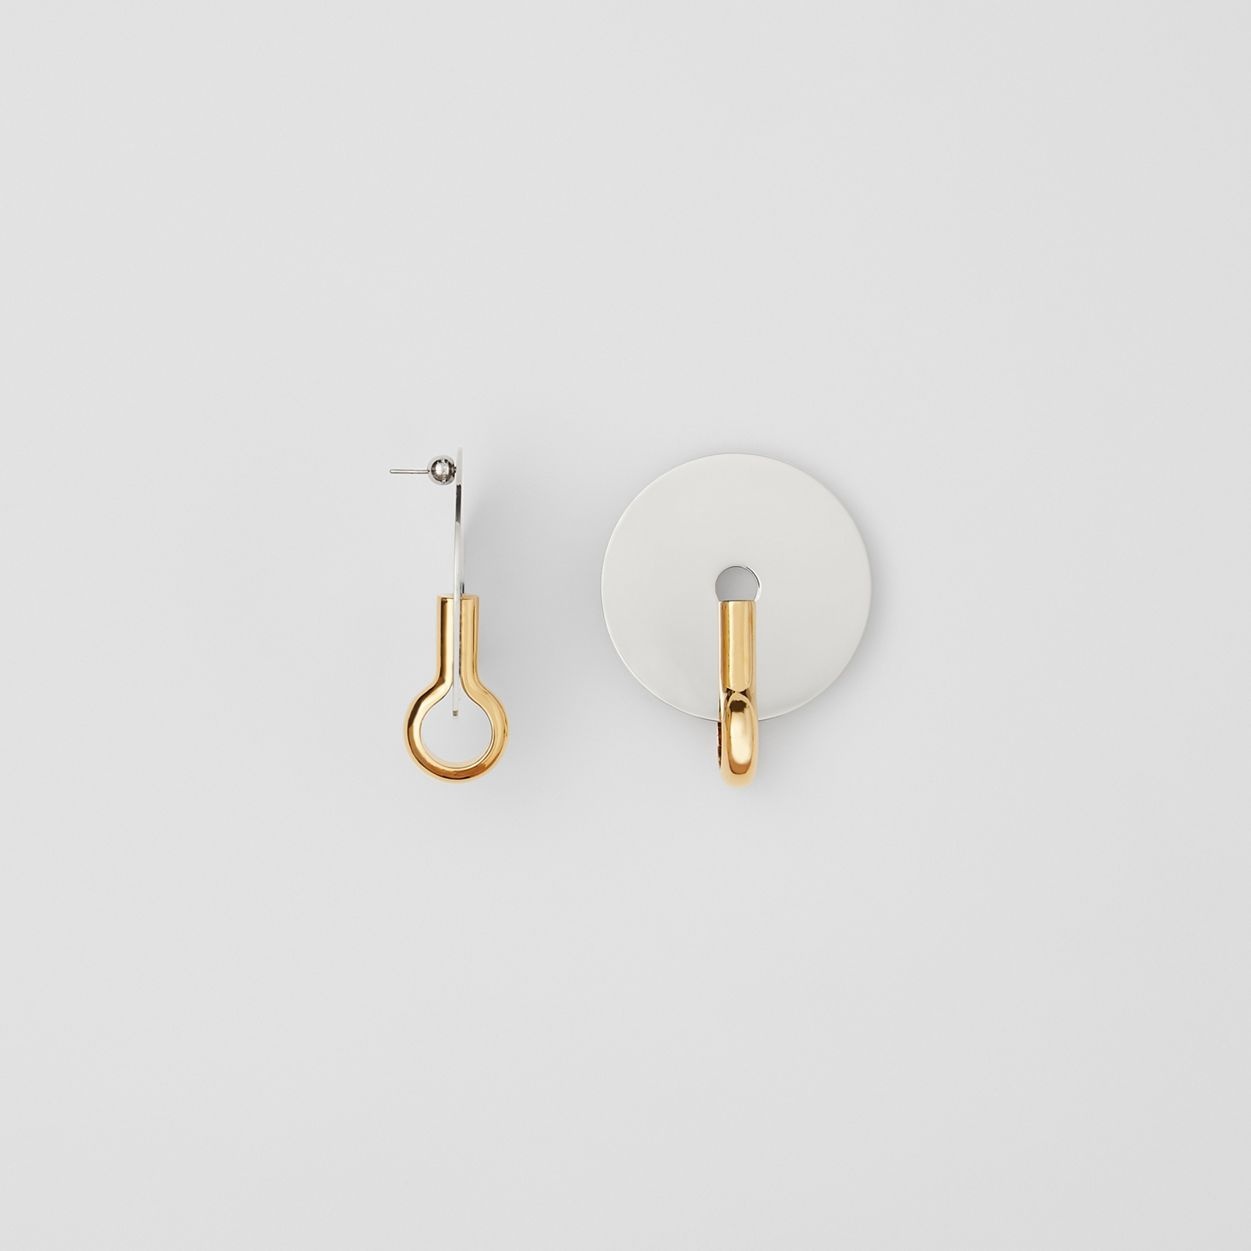 Palladium and Gold-plated Disc Earrings - 4